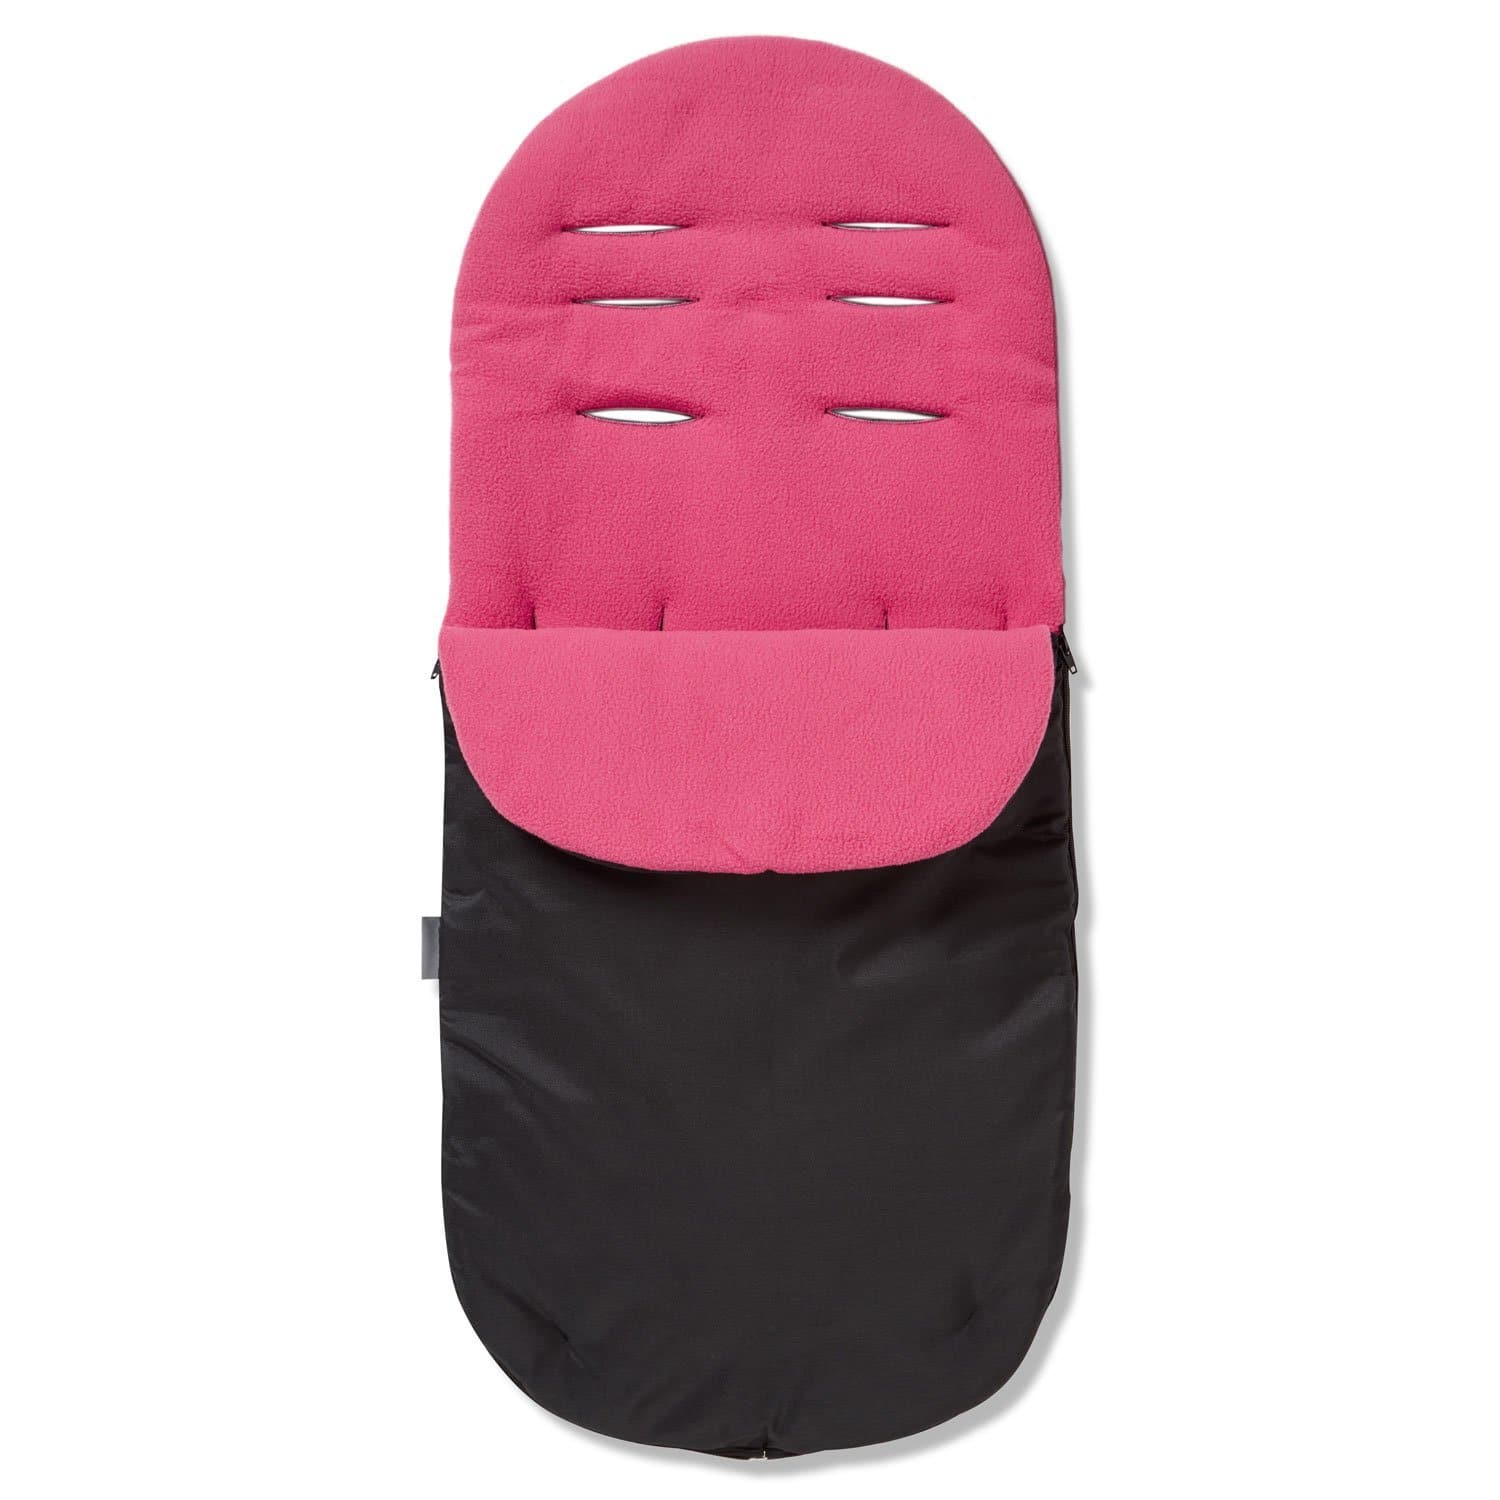 Footmuff / Cosy Toes Compatible with Silver Cross - Dark Pink / Fits All Models | For Your Little One